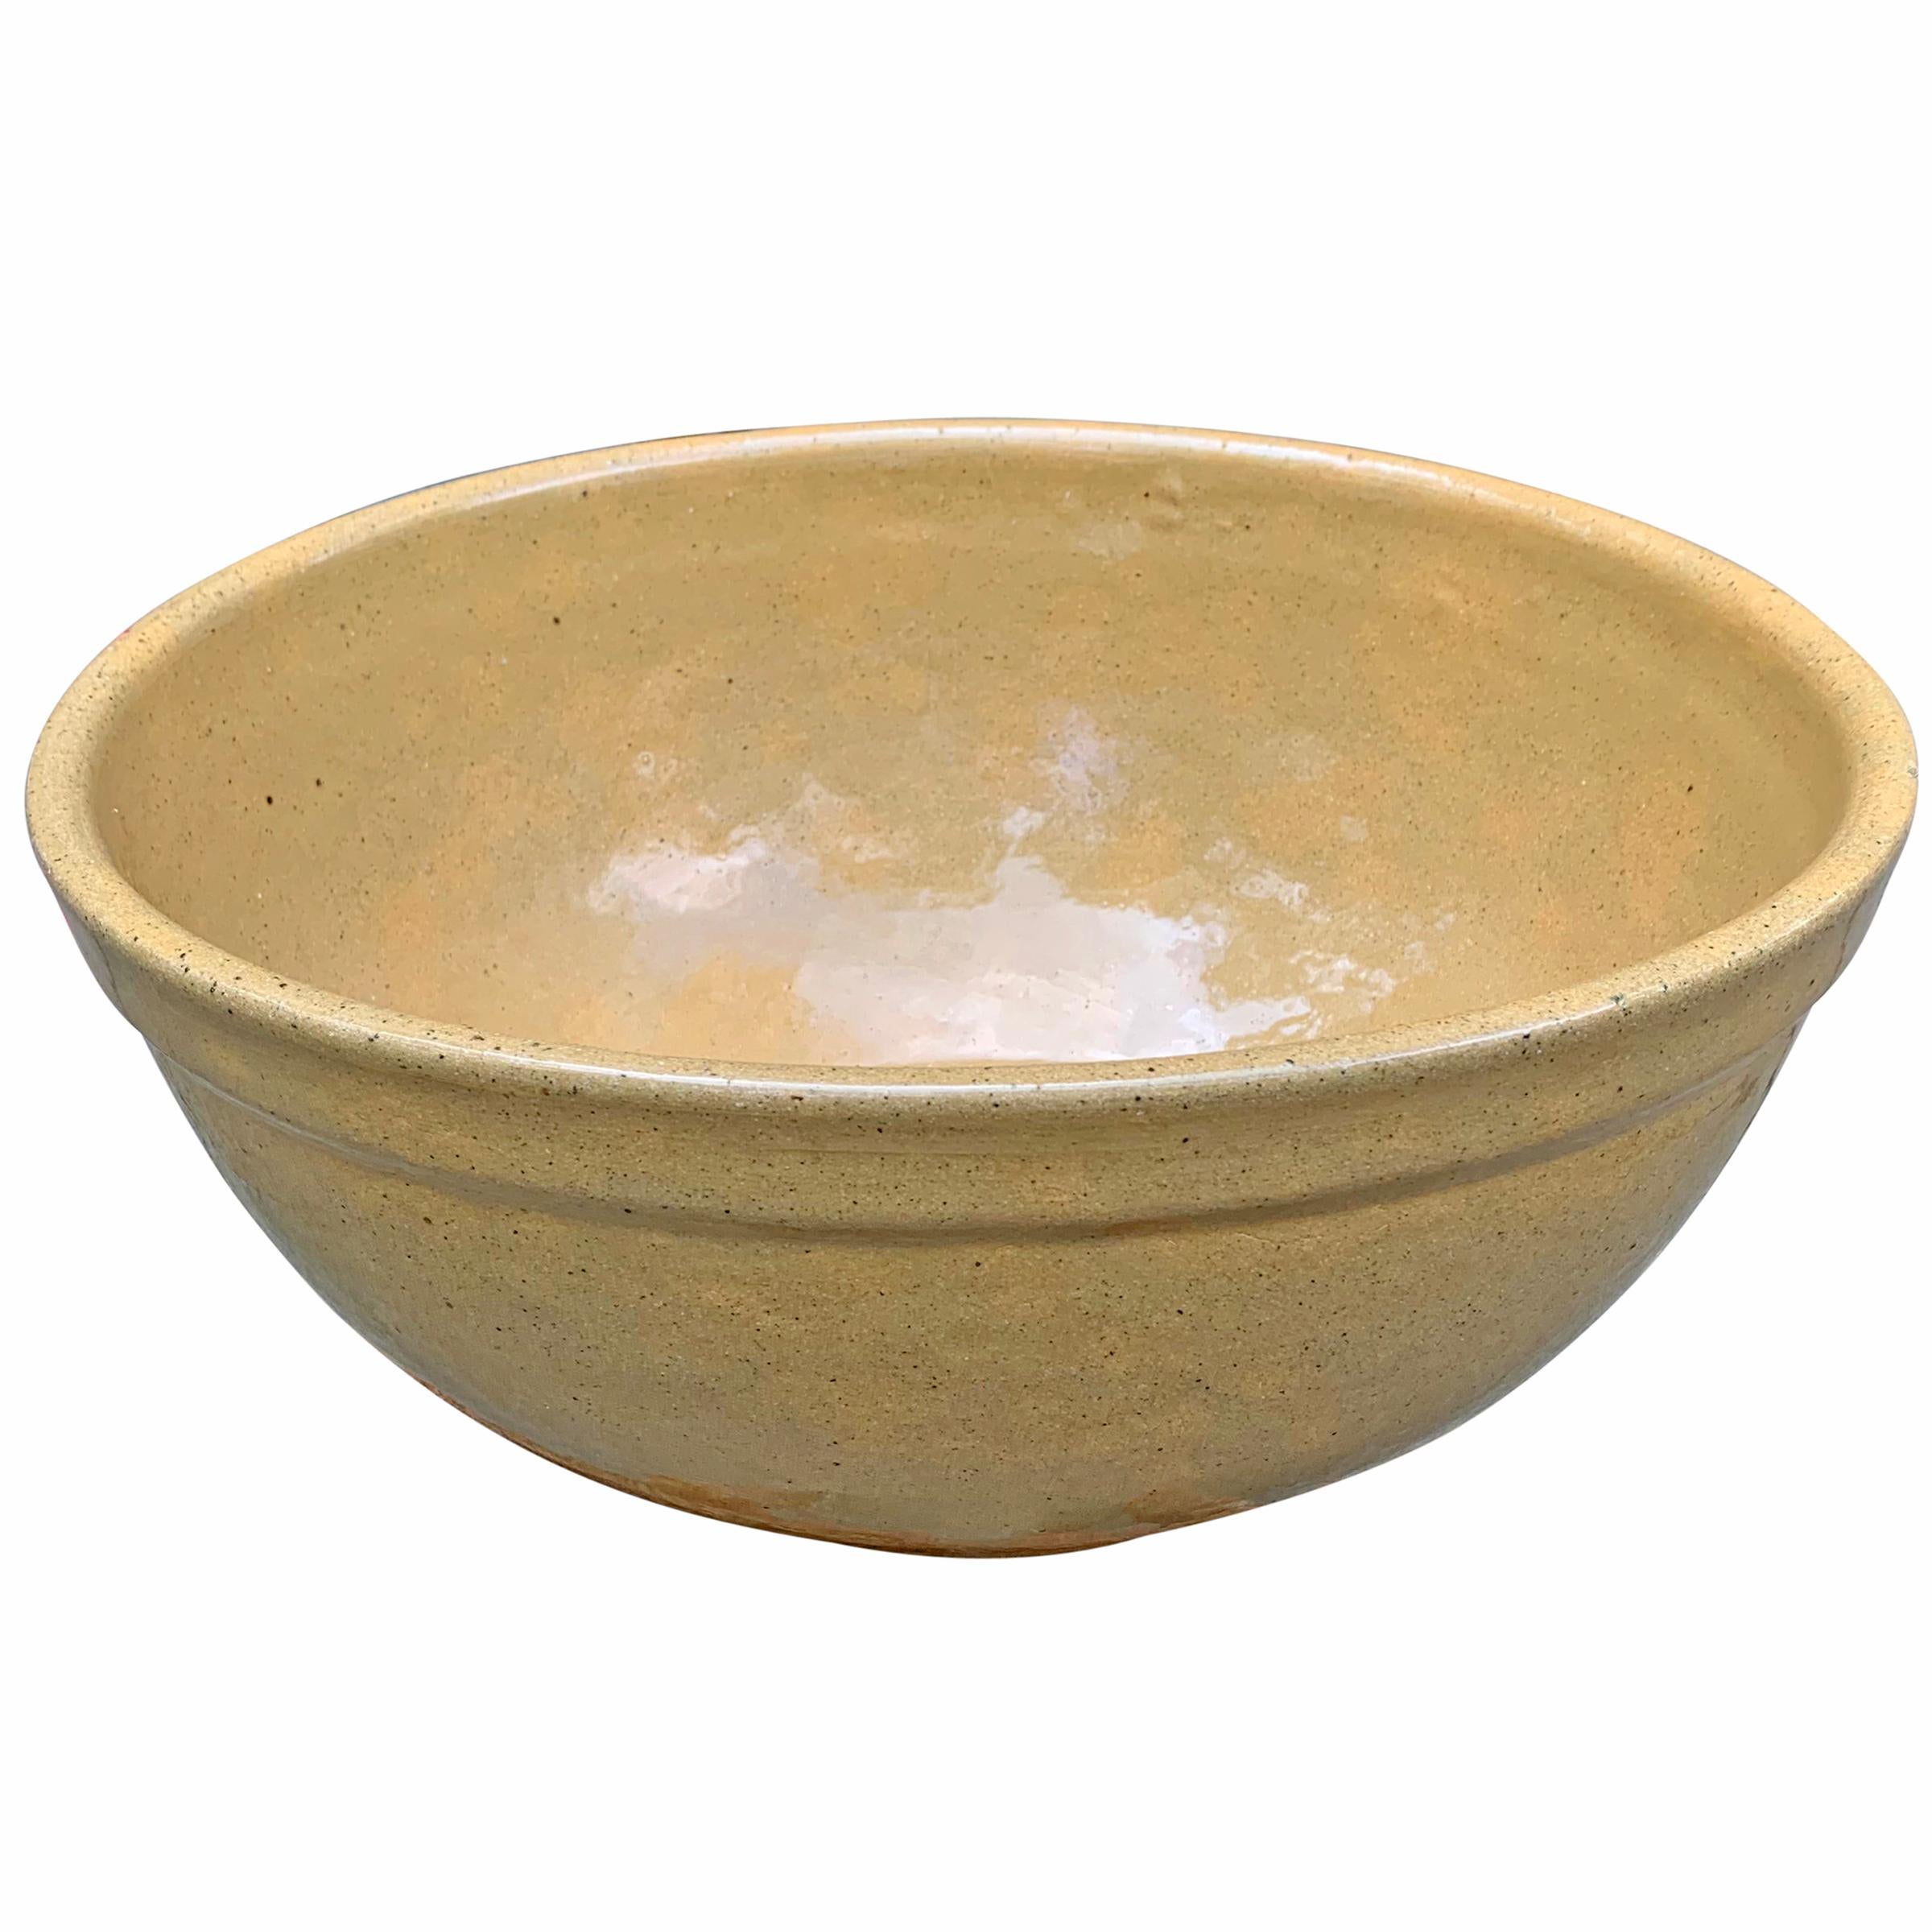 An incredible large 19th century American glazed yellowware mixing bowl with a fantastic scale perfect for mixing bread dough, cake batter, or serving a salad at your next gathering.